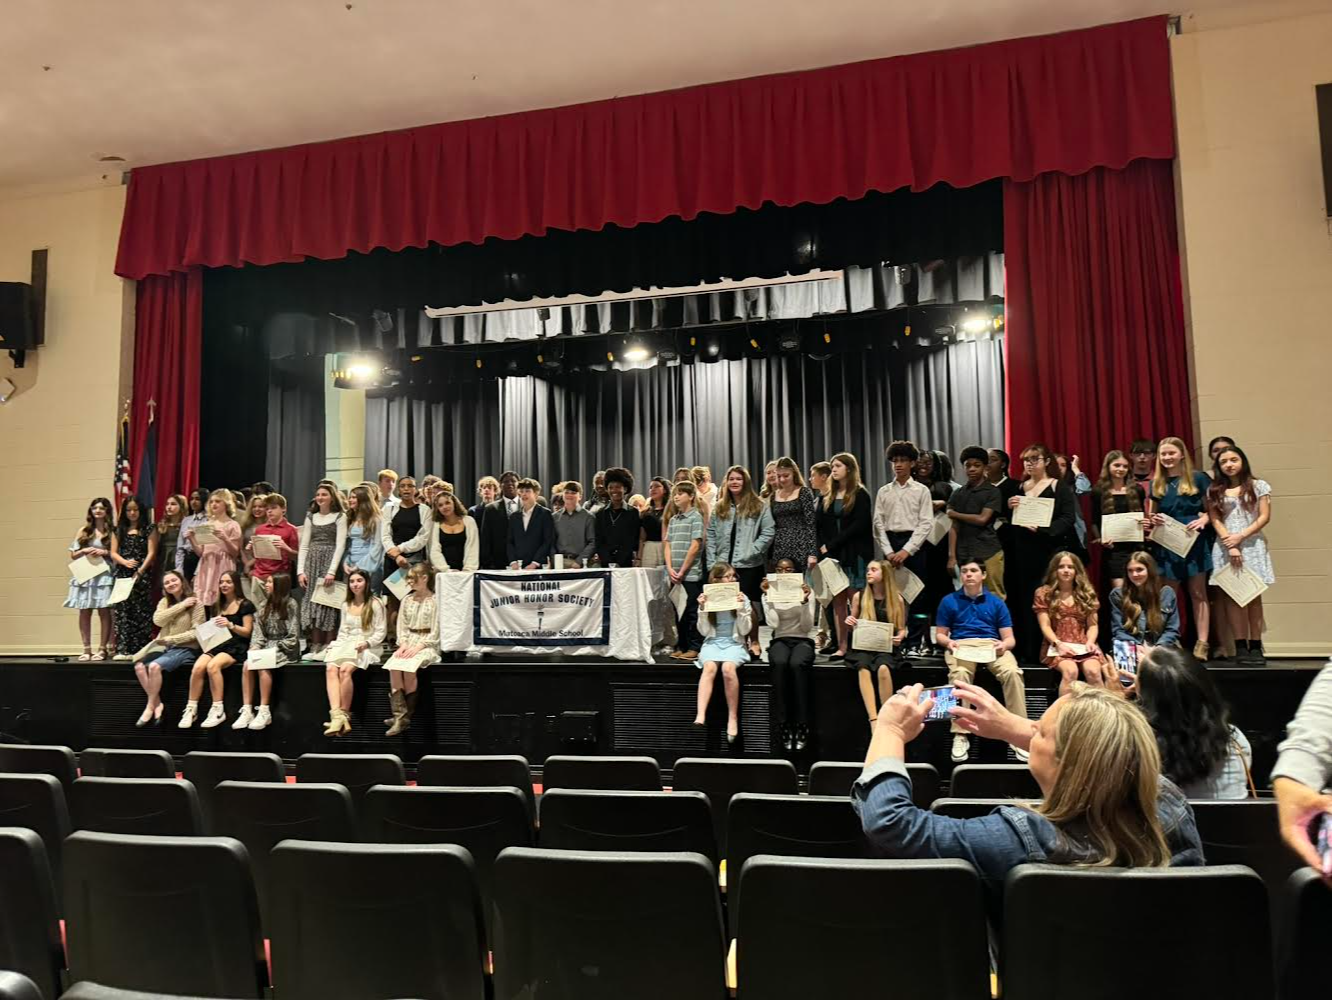 A group photo of the National Junior Honor Society on stage